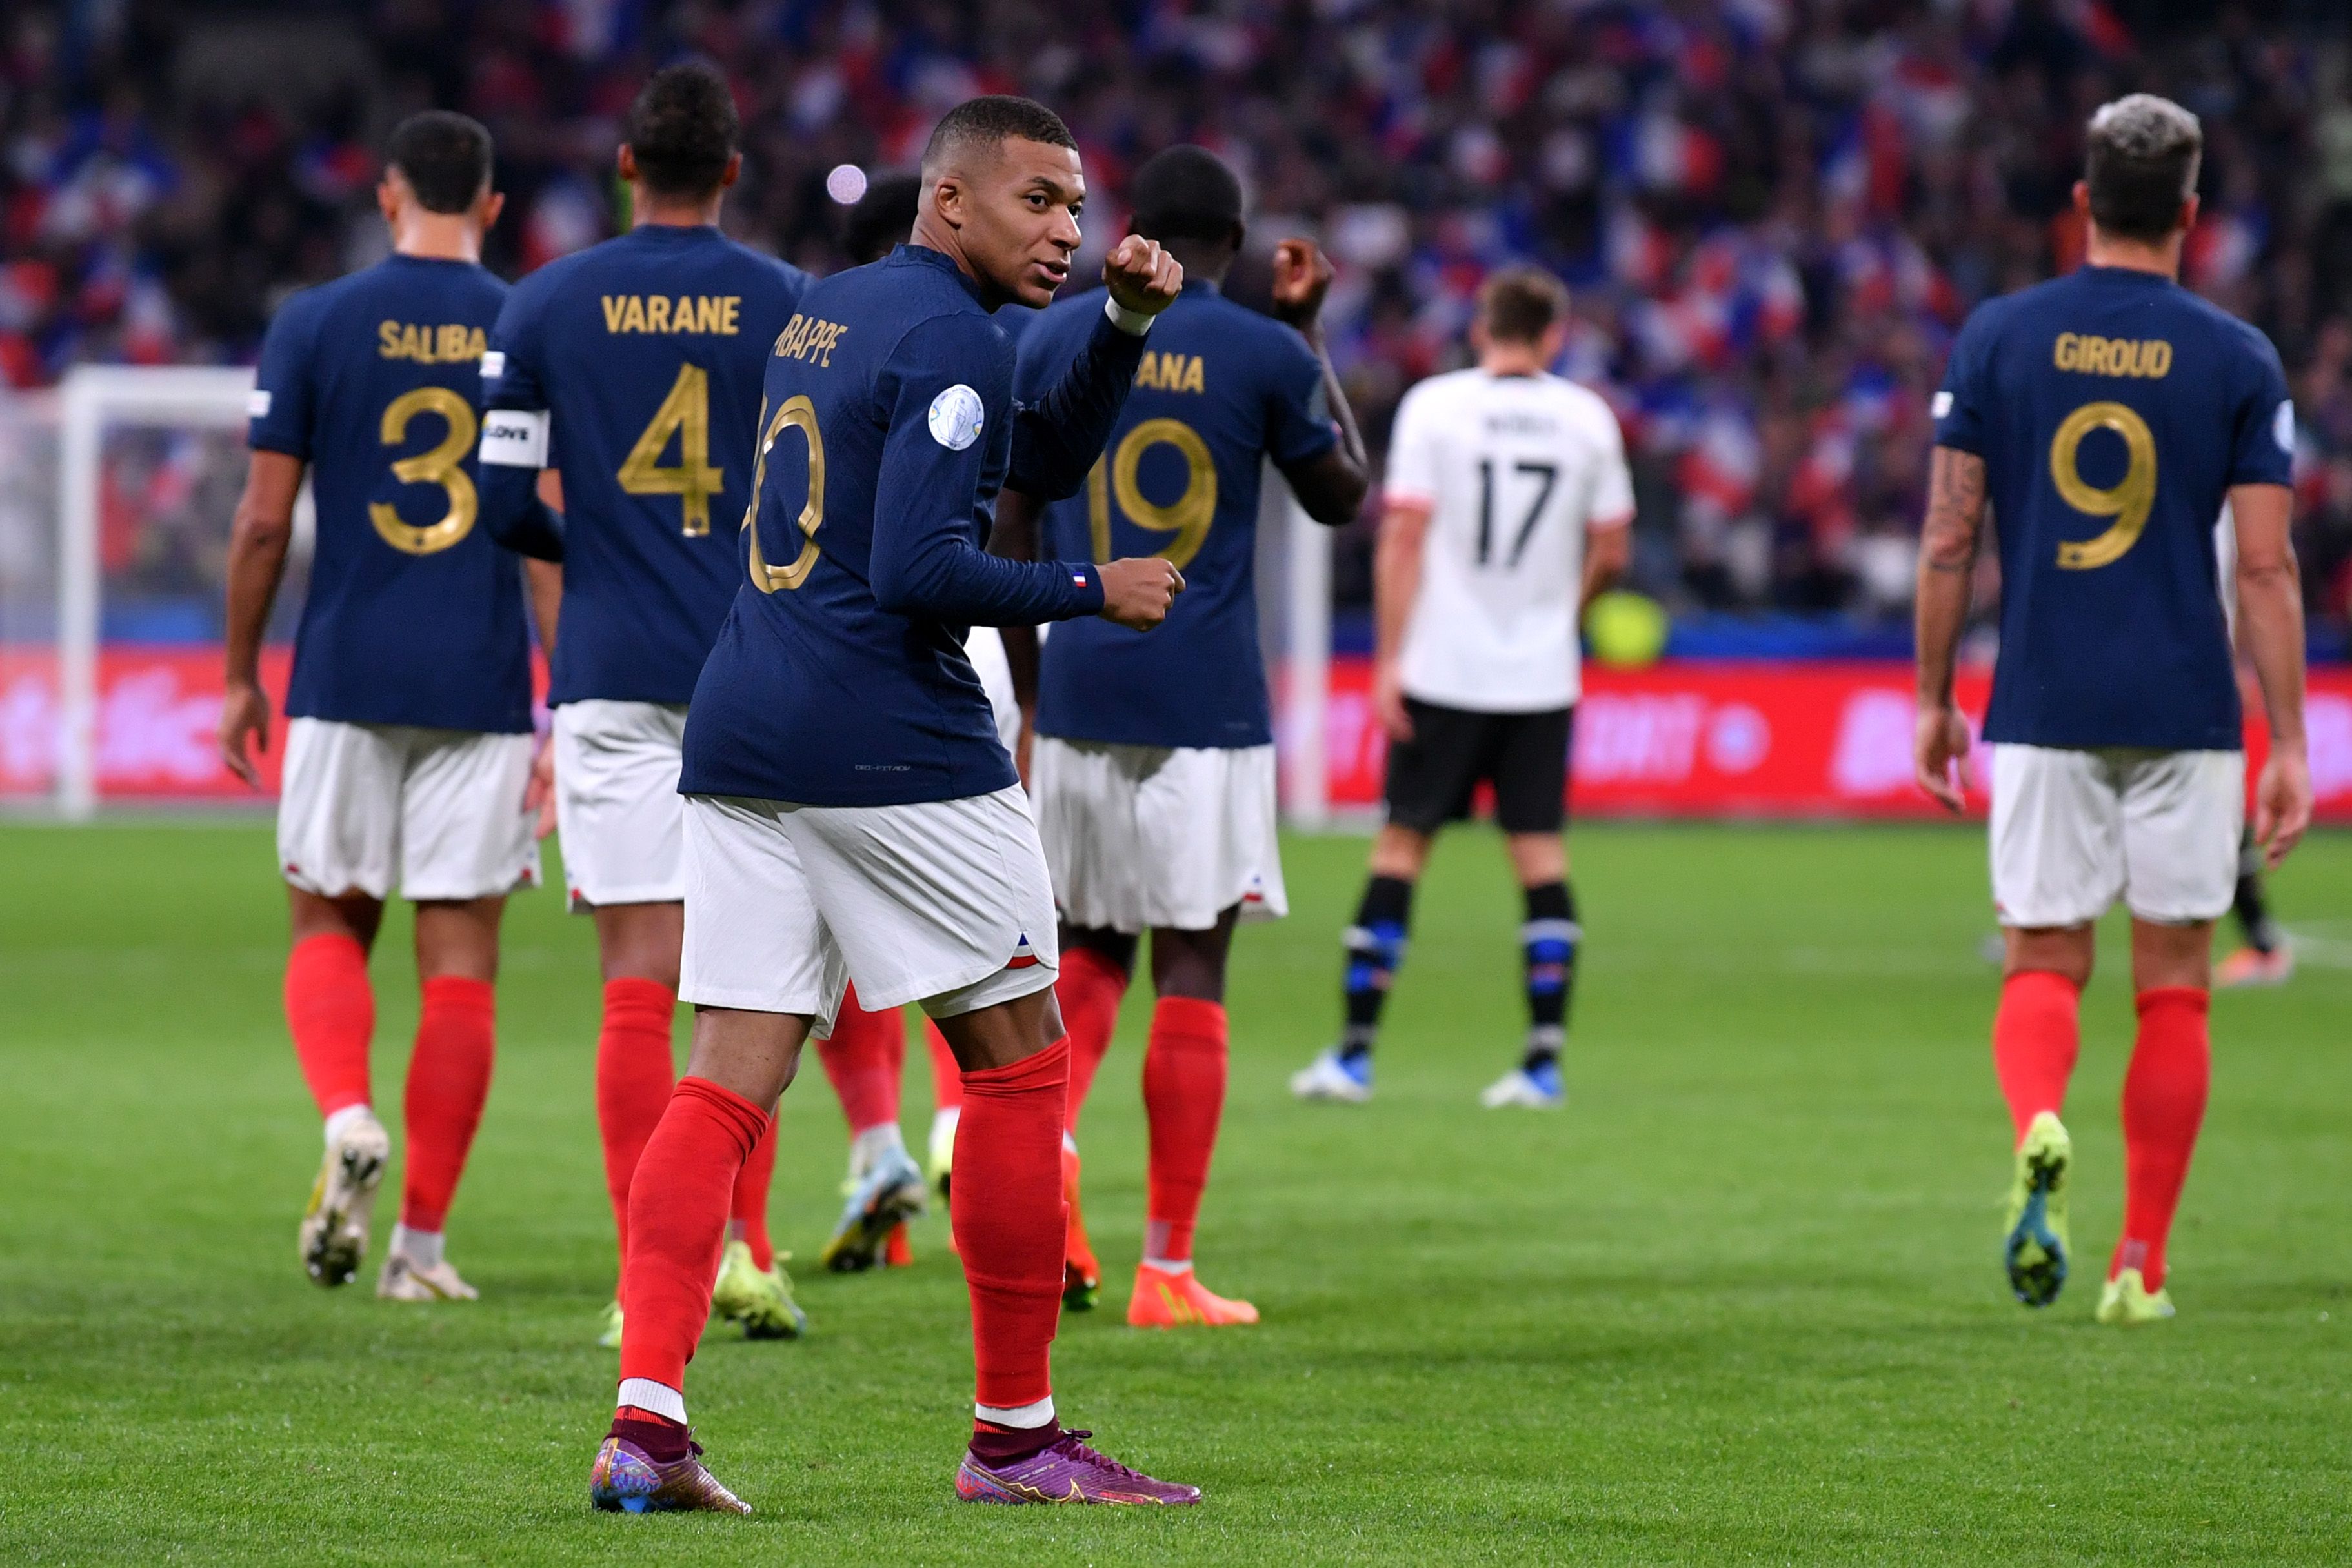 Kylian Mbappe will lead the line for France at the World Cup